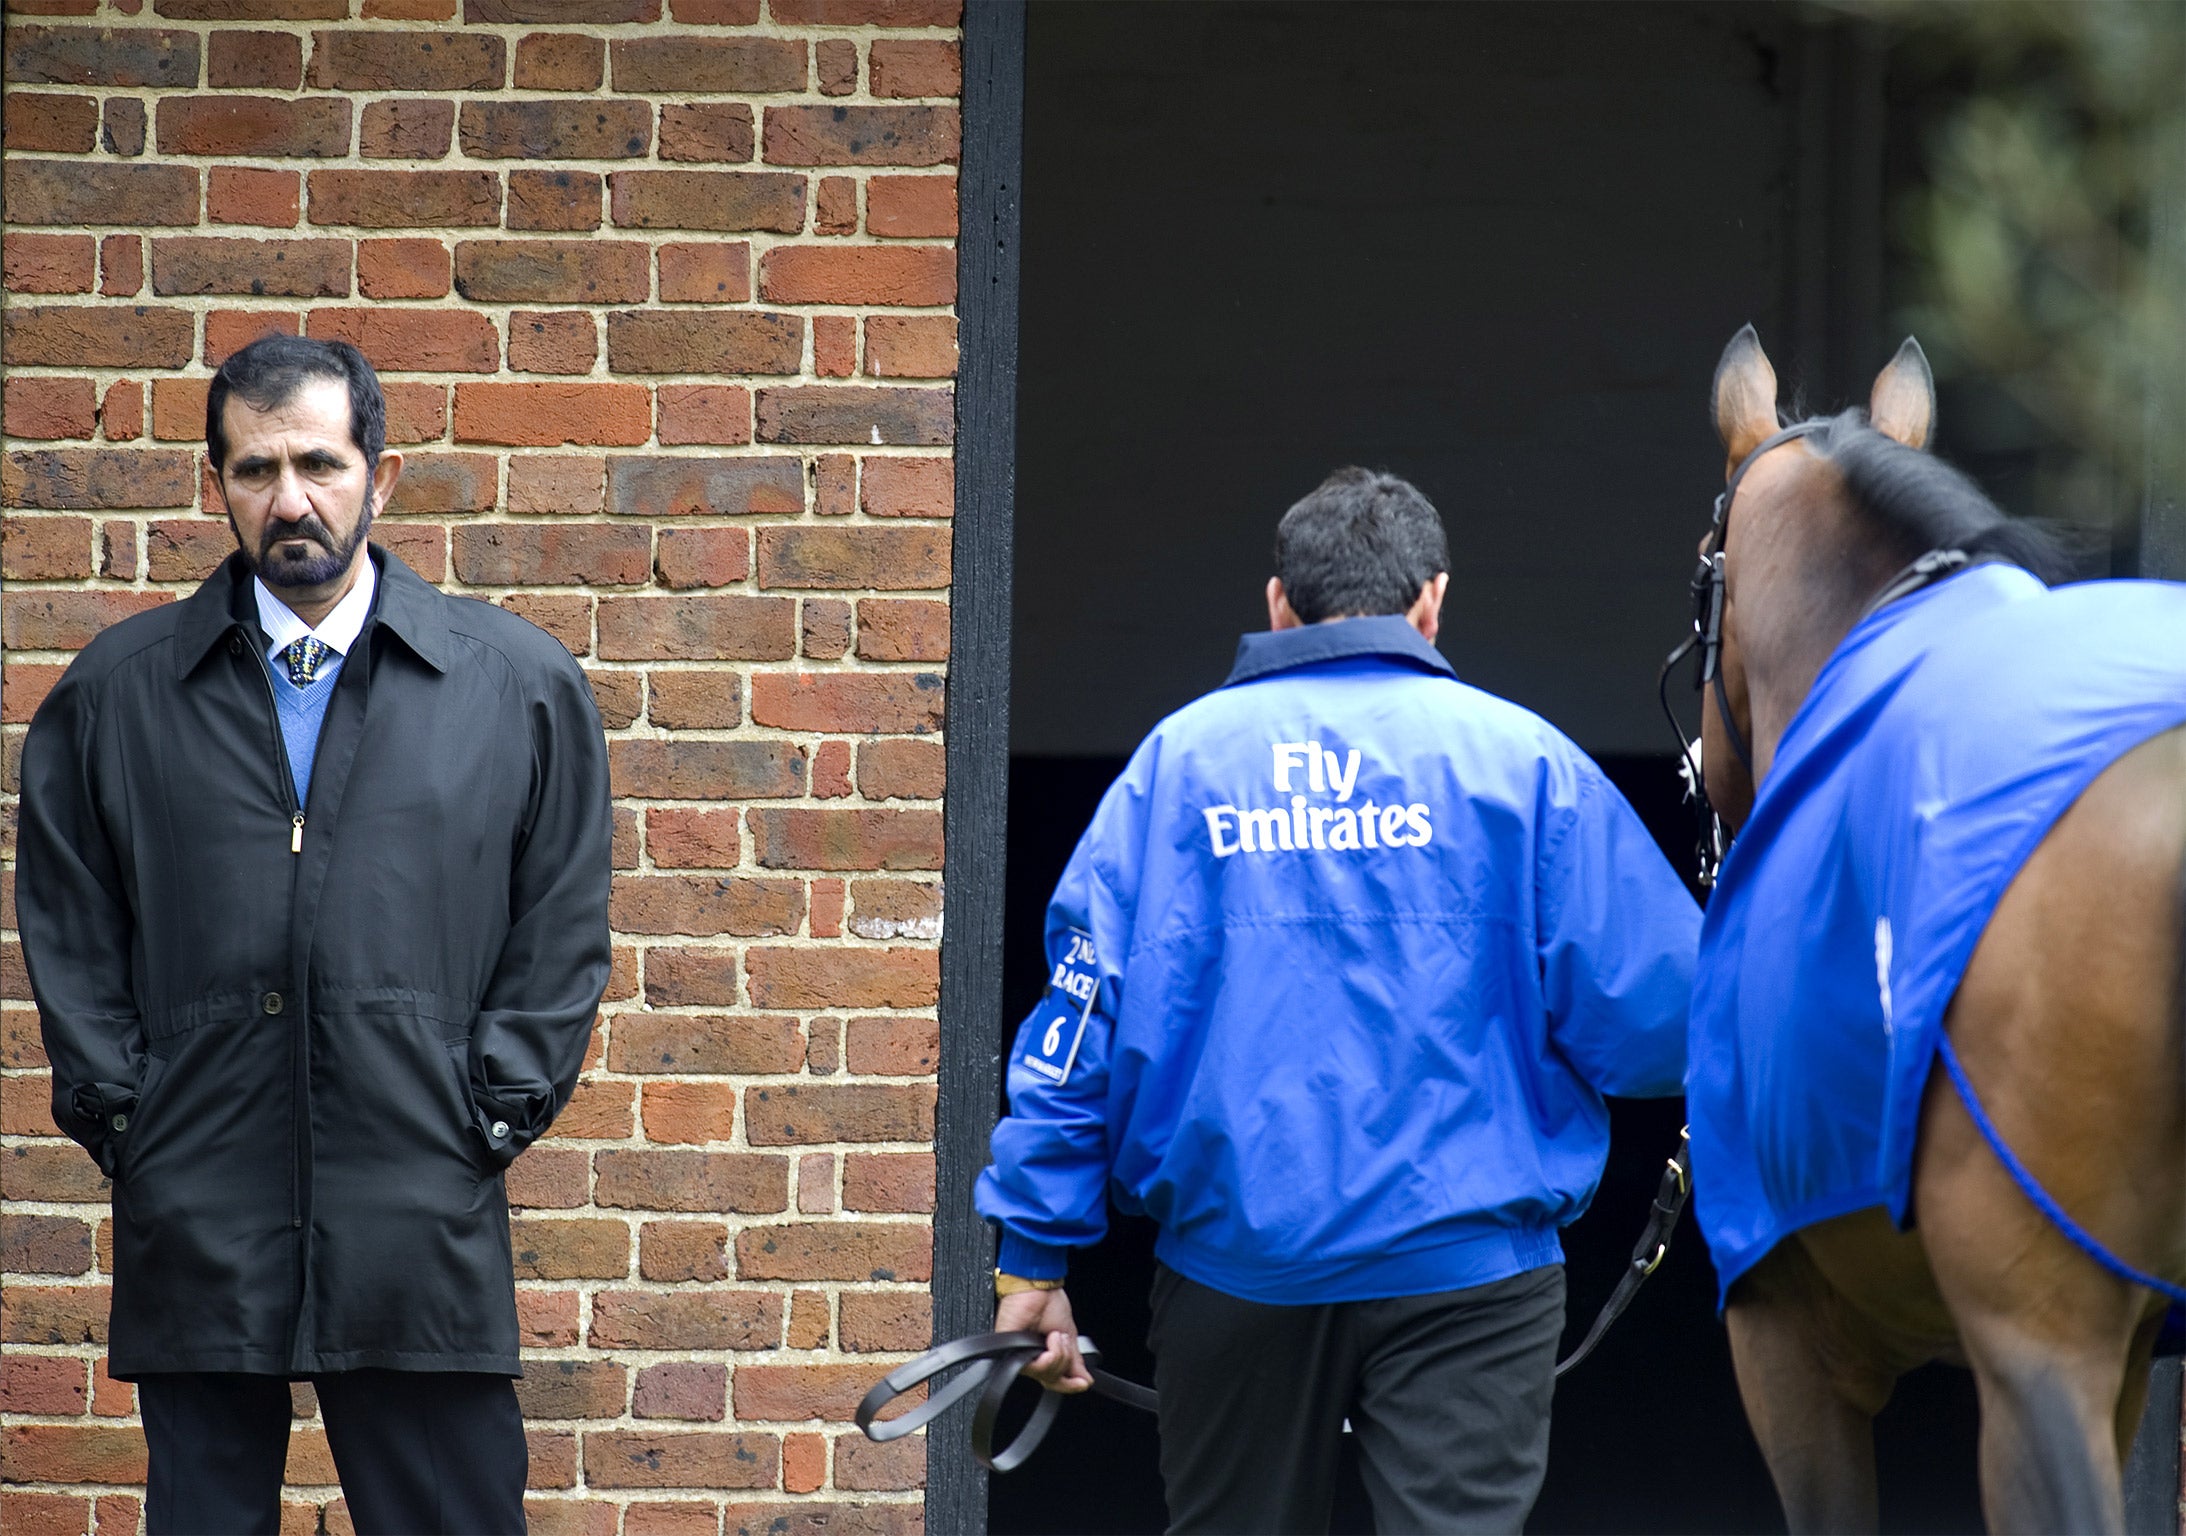 Owner Sheikh Mohammed is severely embarrassed that some of his top horses are involved